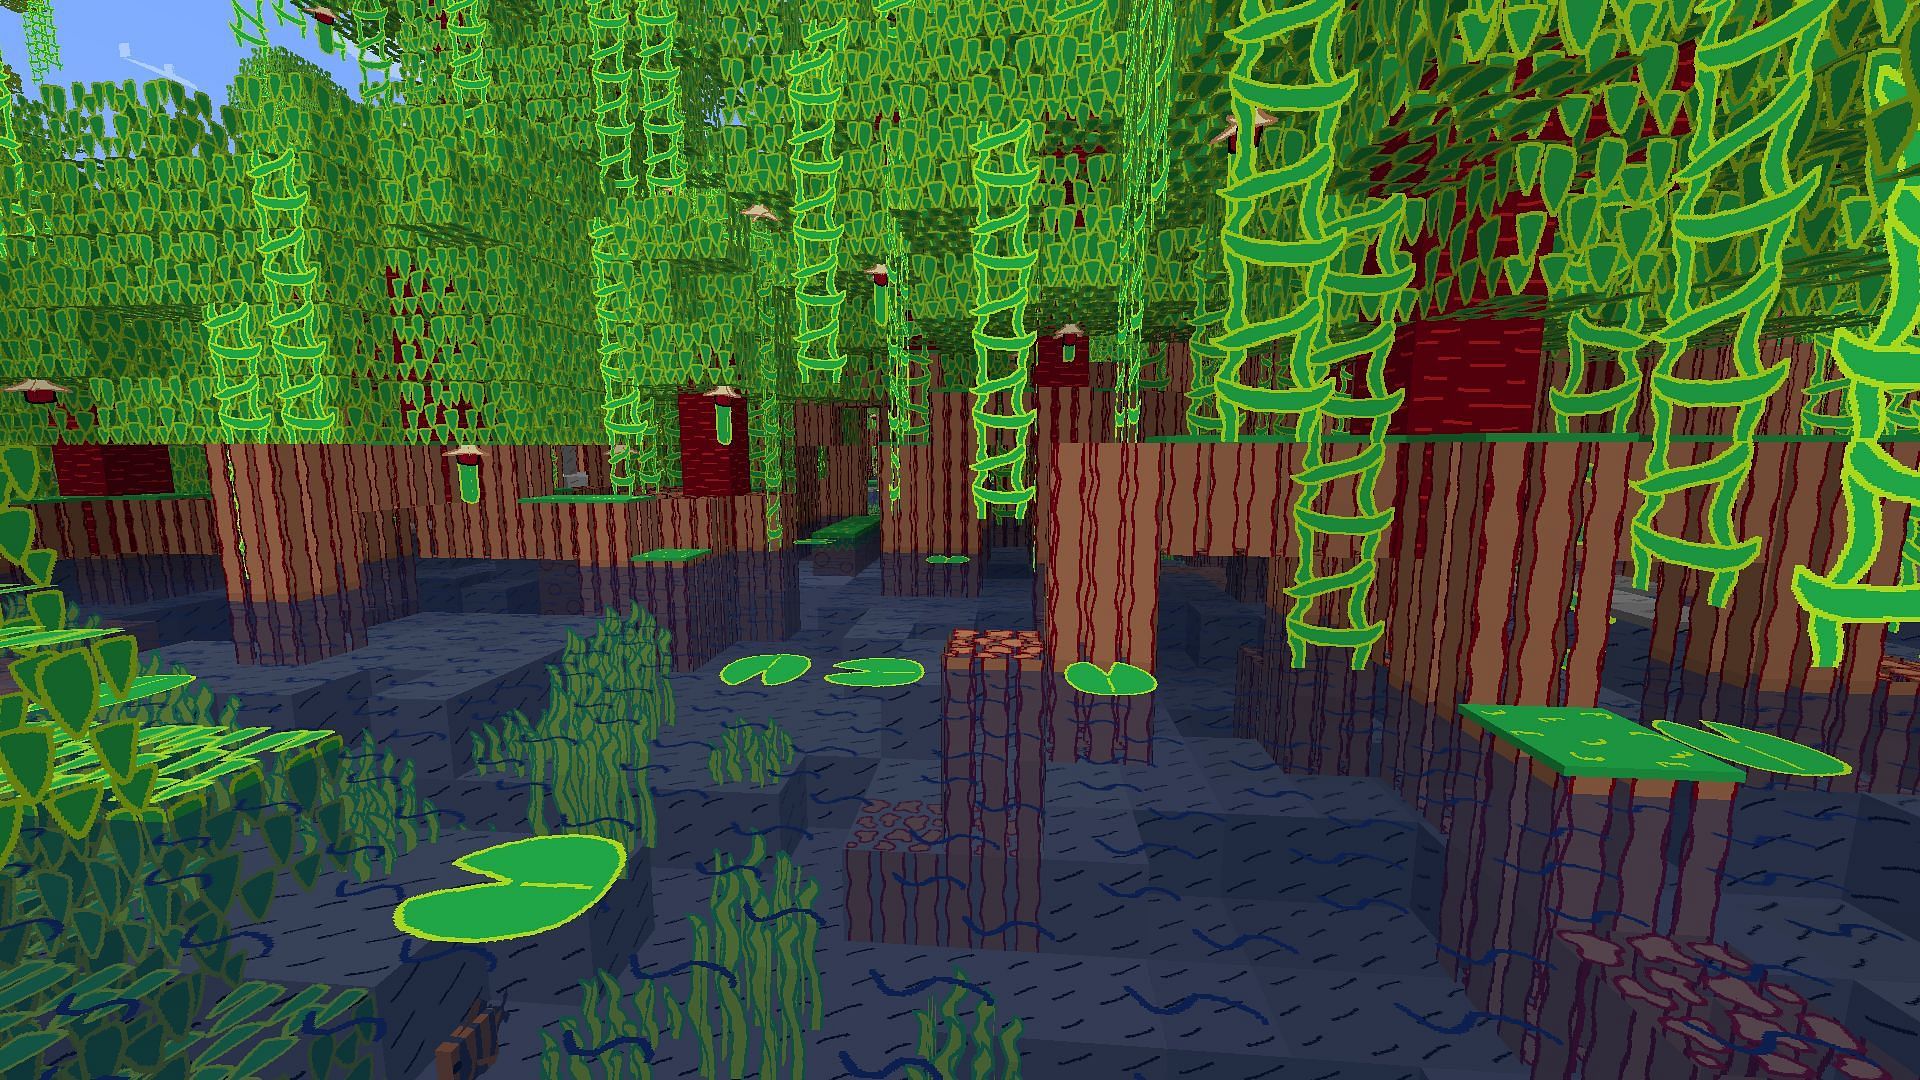 A mangrove swamp using the MS_Painted texture pack, updated to 1.19 (Image via Minecraft)